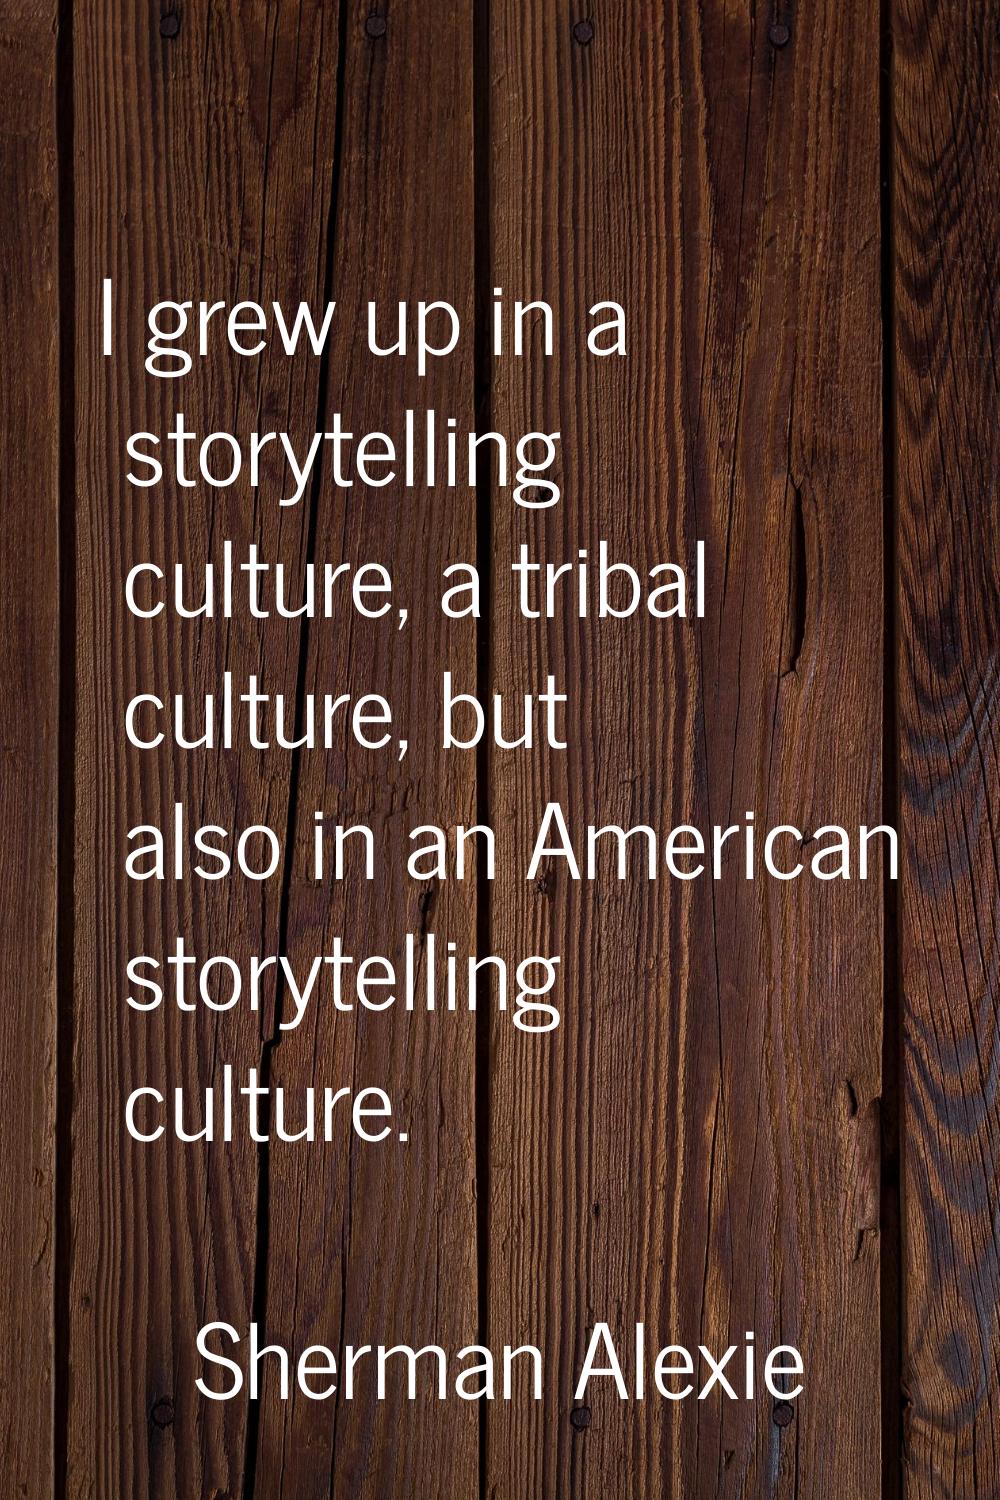 I grew up in a storytelling culture, a tribal culture, but also in an American storytelling culture